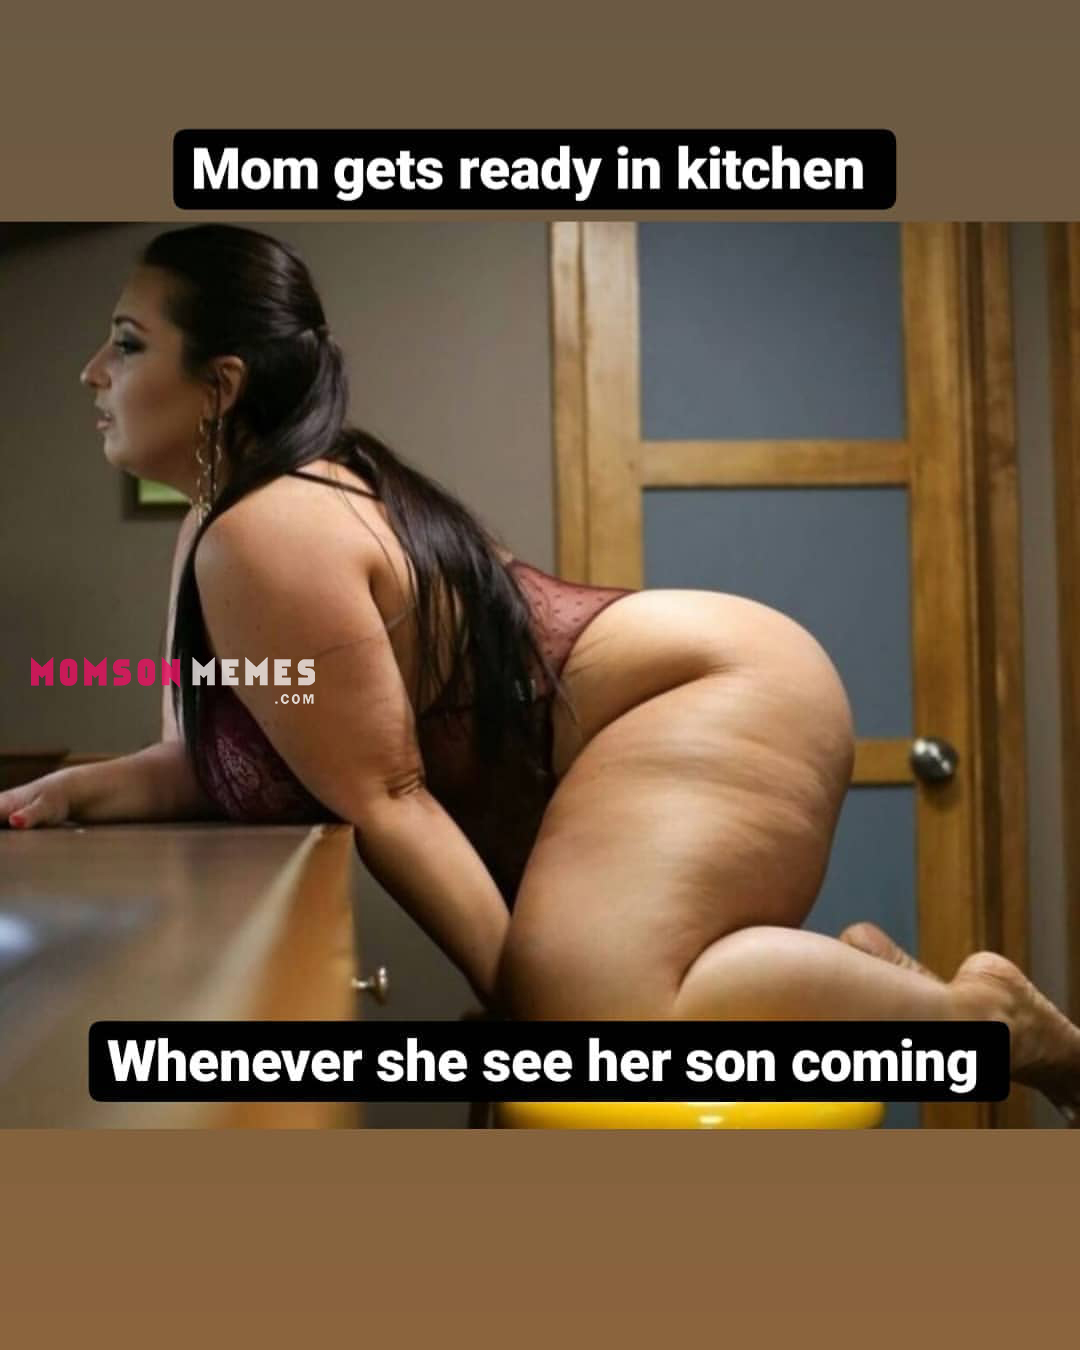 Mom getting ready in kitchen..